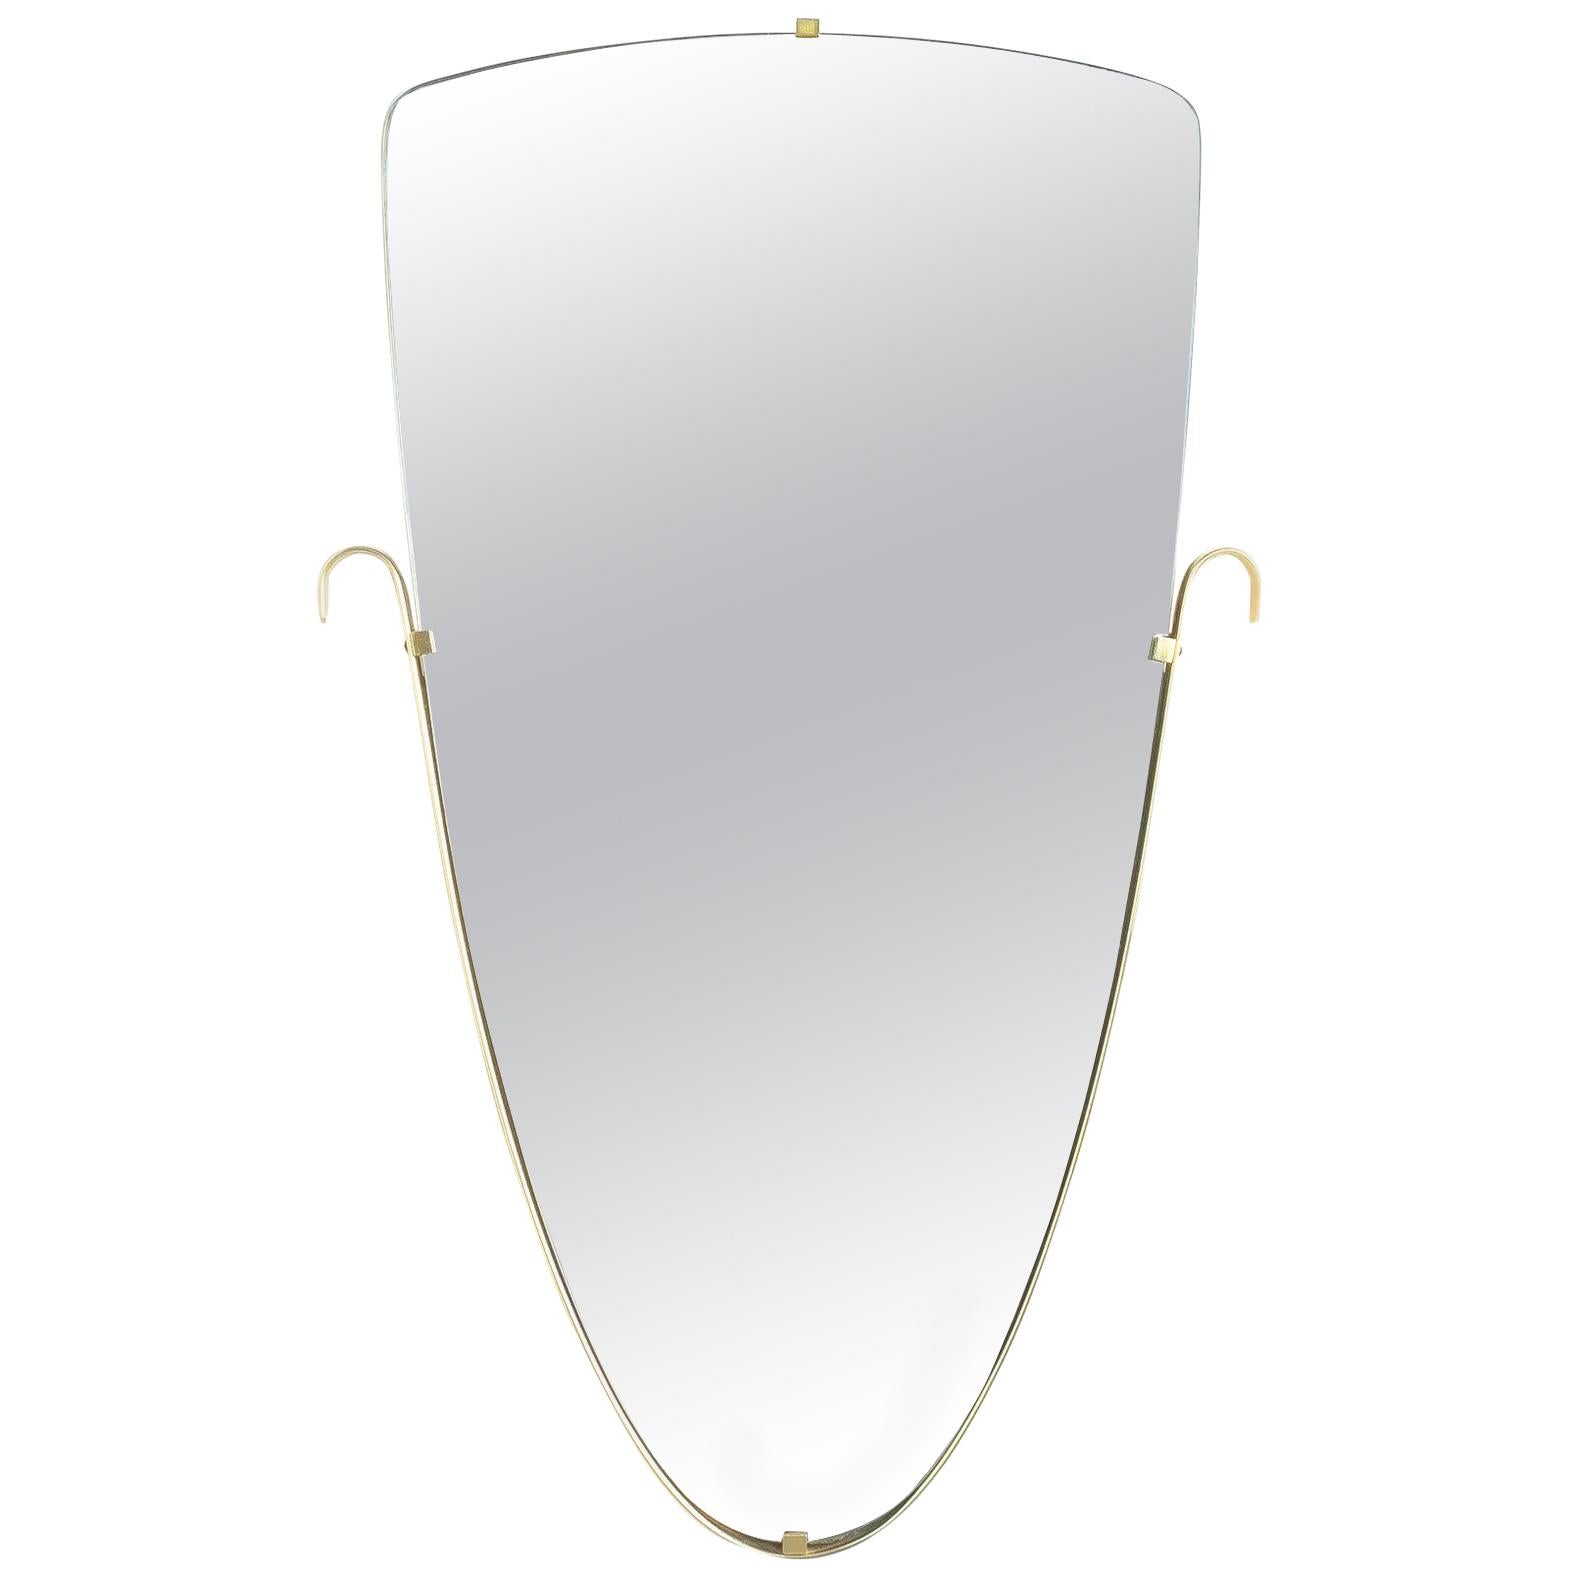 Organic Mirror with Brass Accents, Italy, 1955